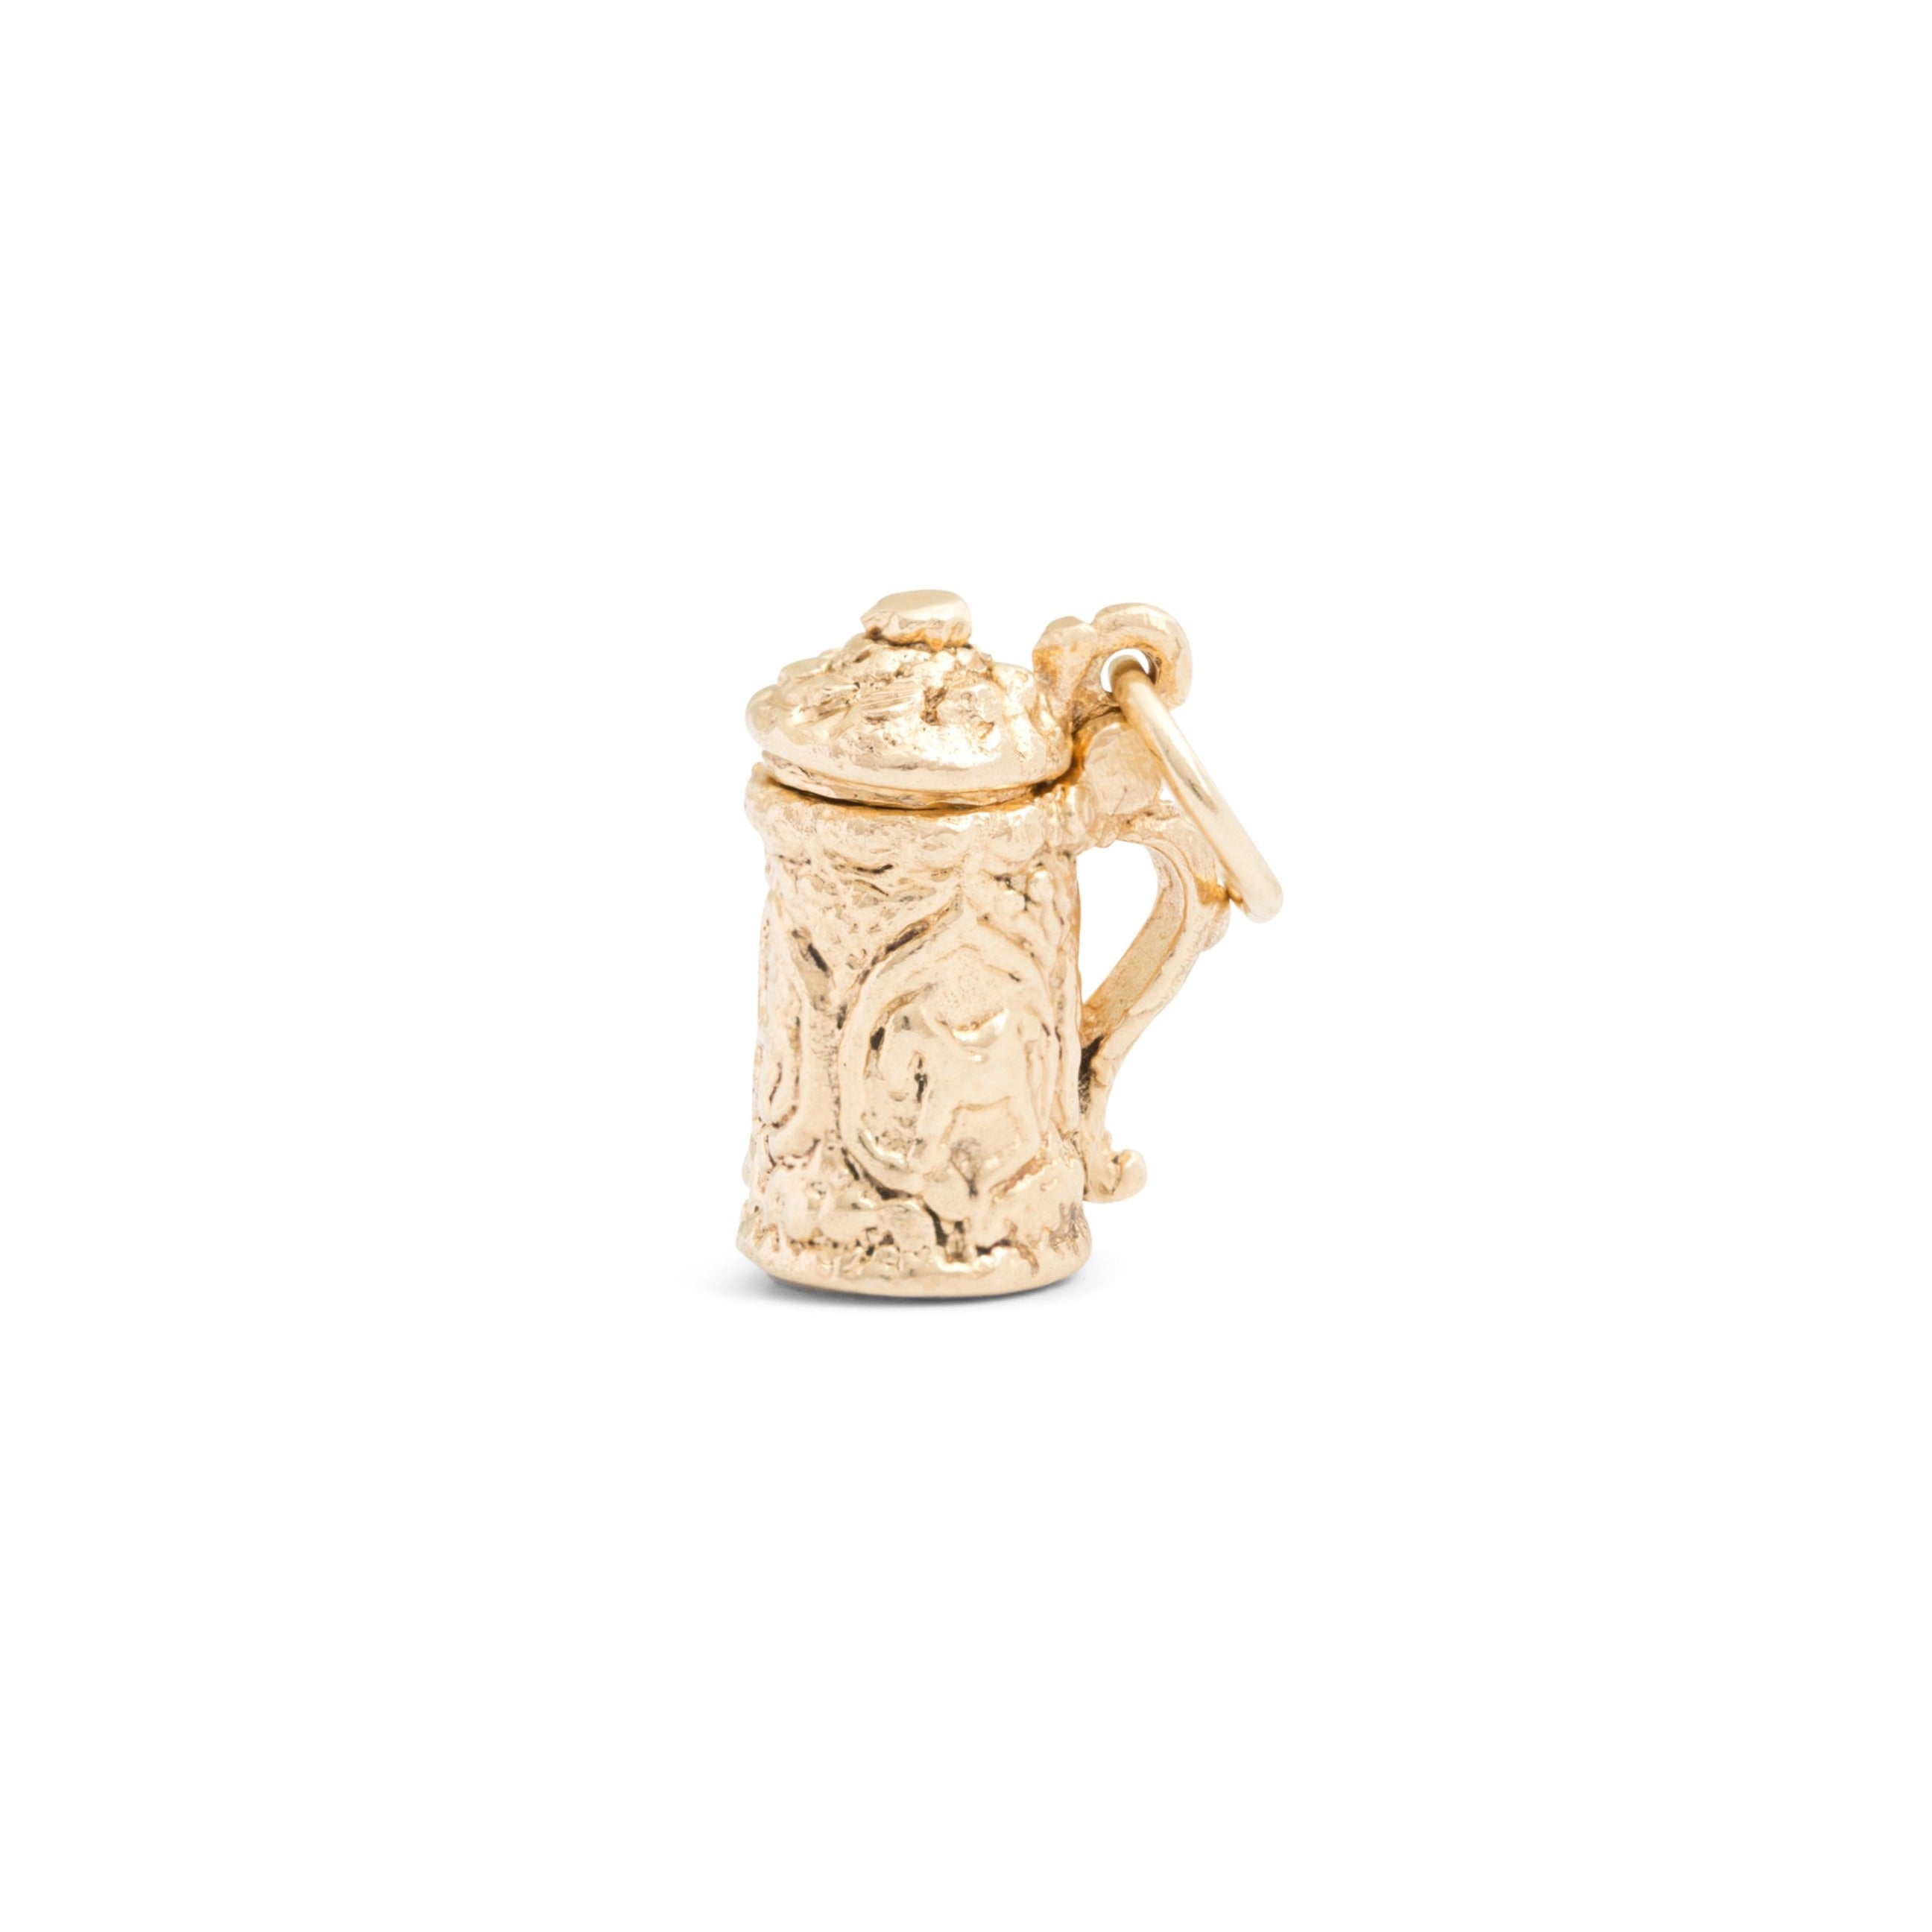 Movable Beer Stein 14k Gold Charm